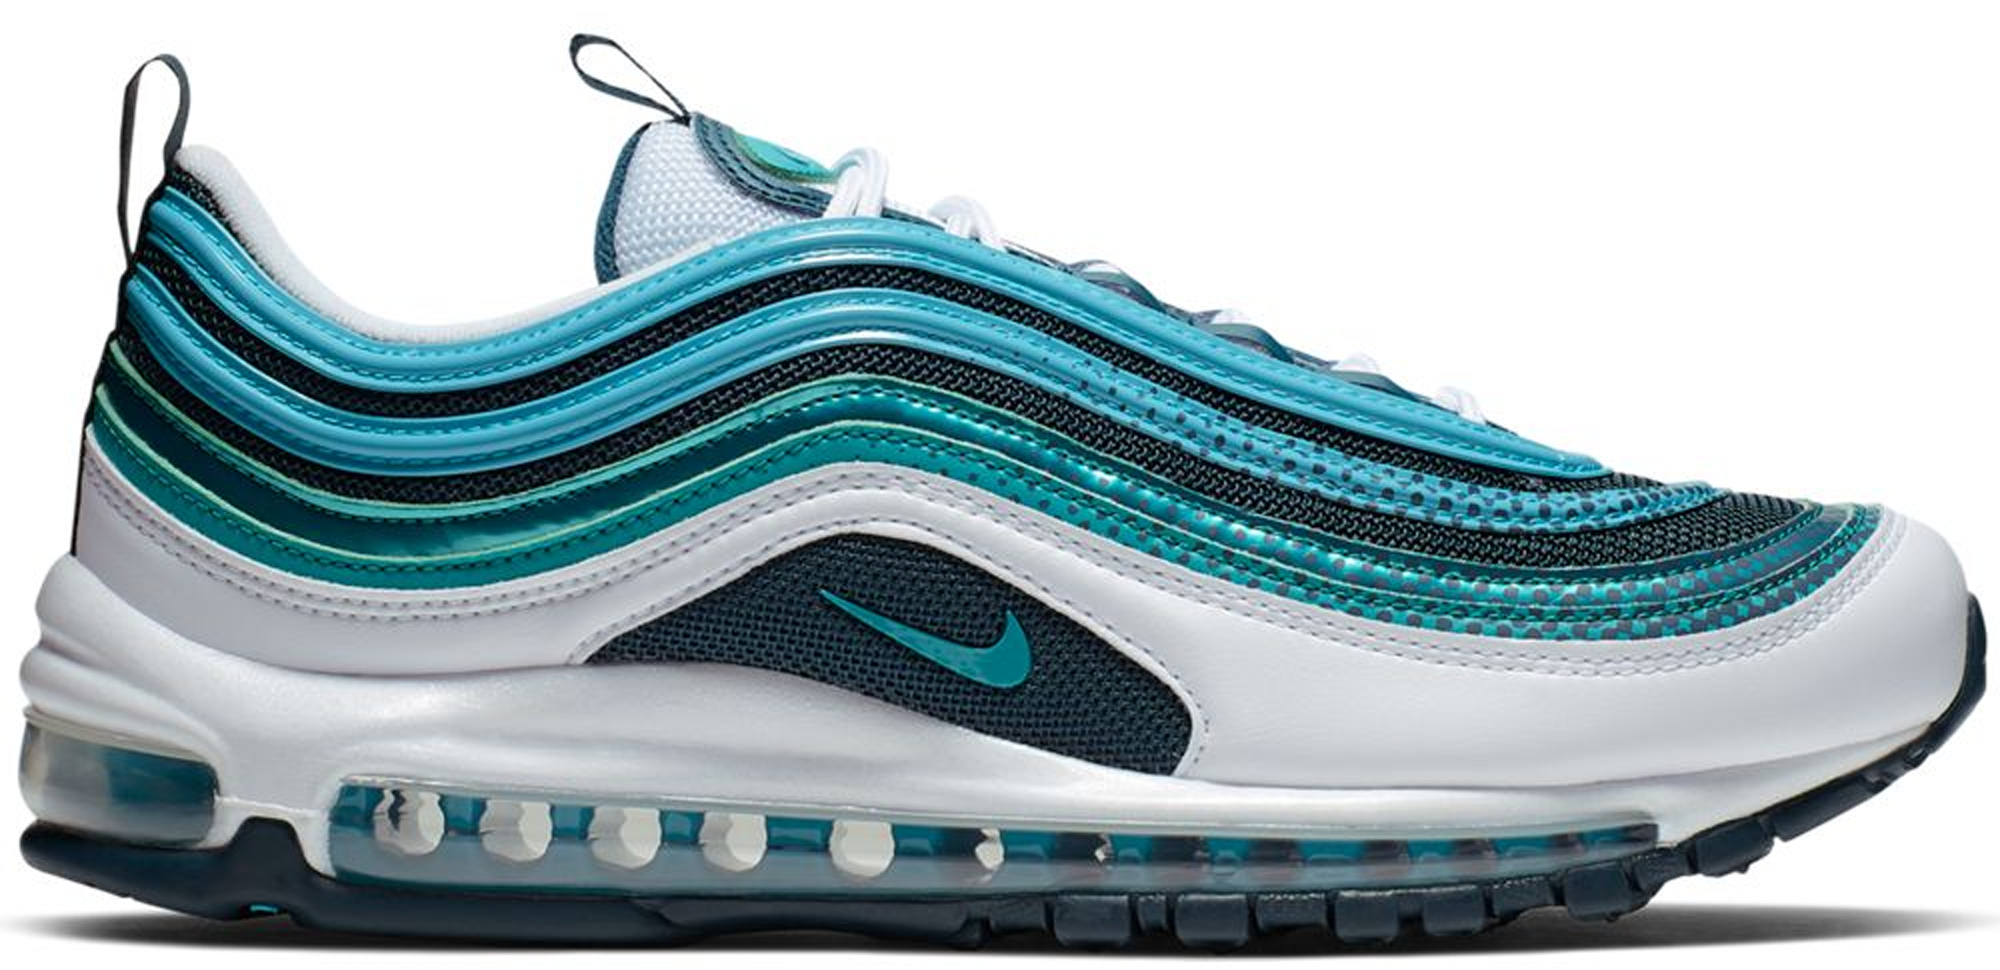 teal and white air max